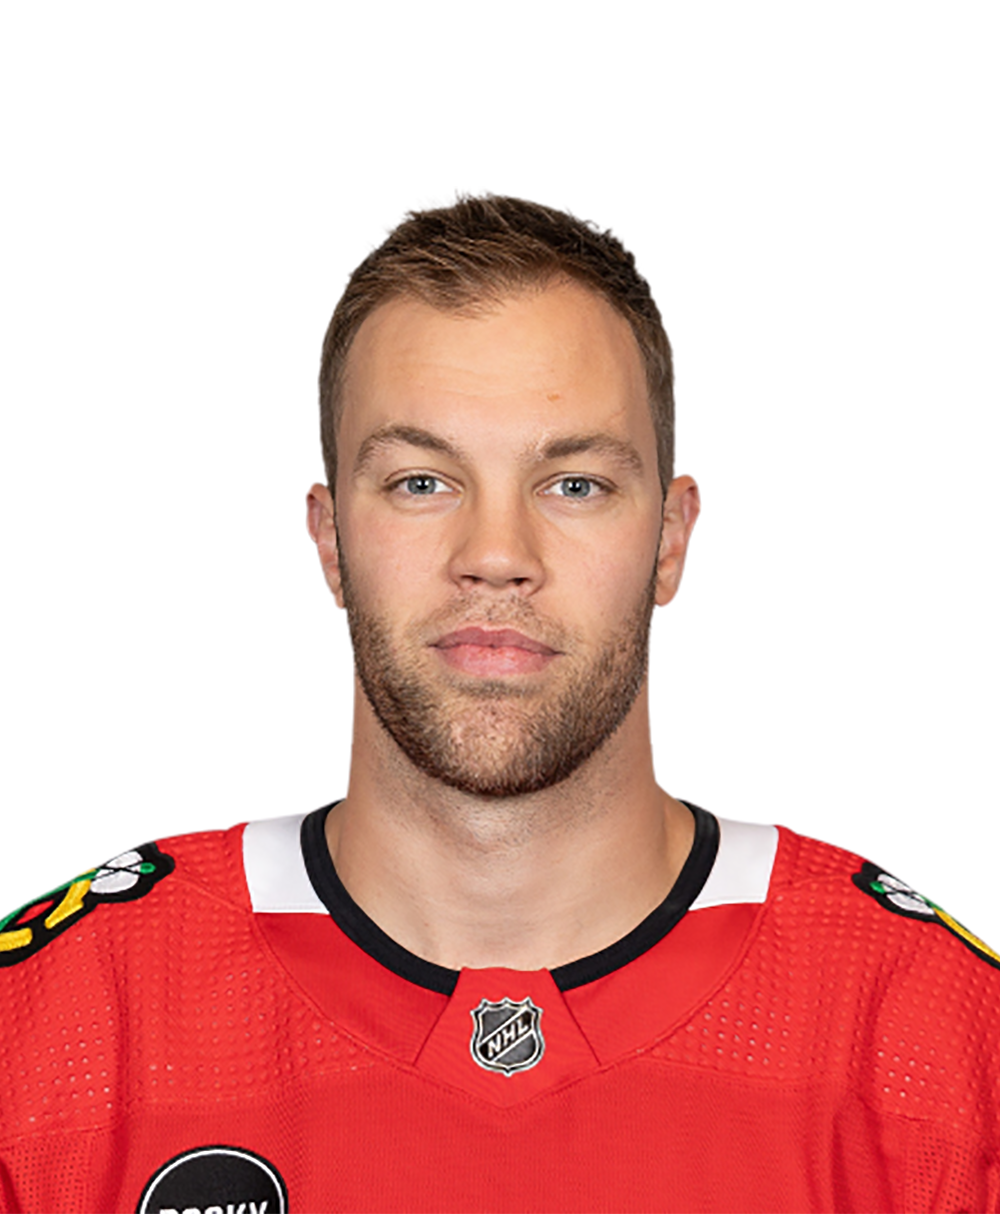 Life without Taylor Hall: New Jersey Devils expect players to